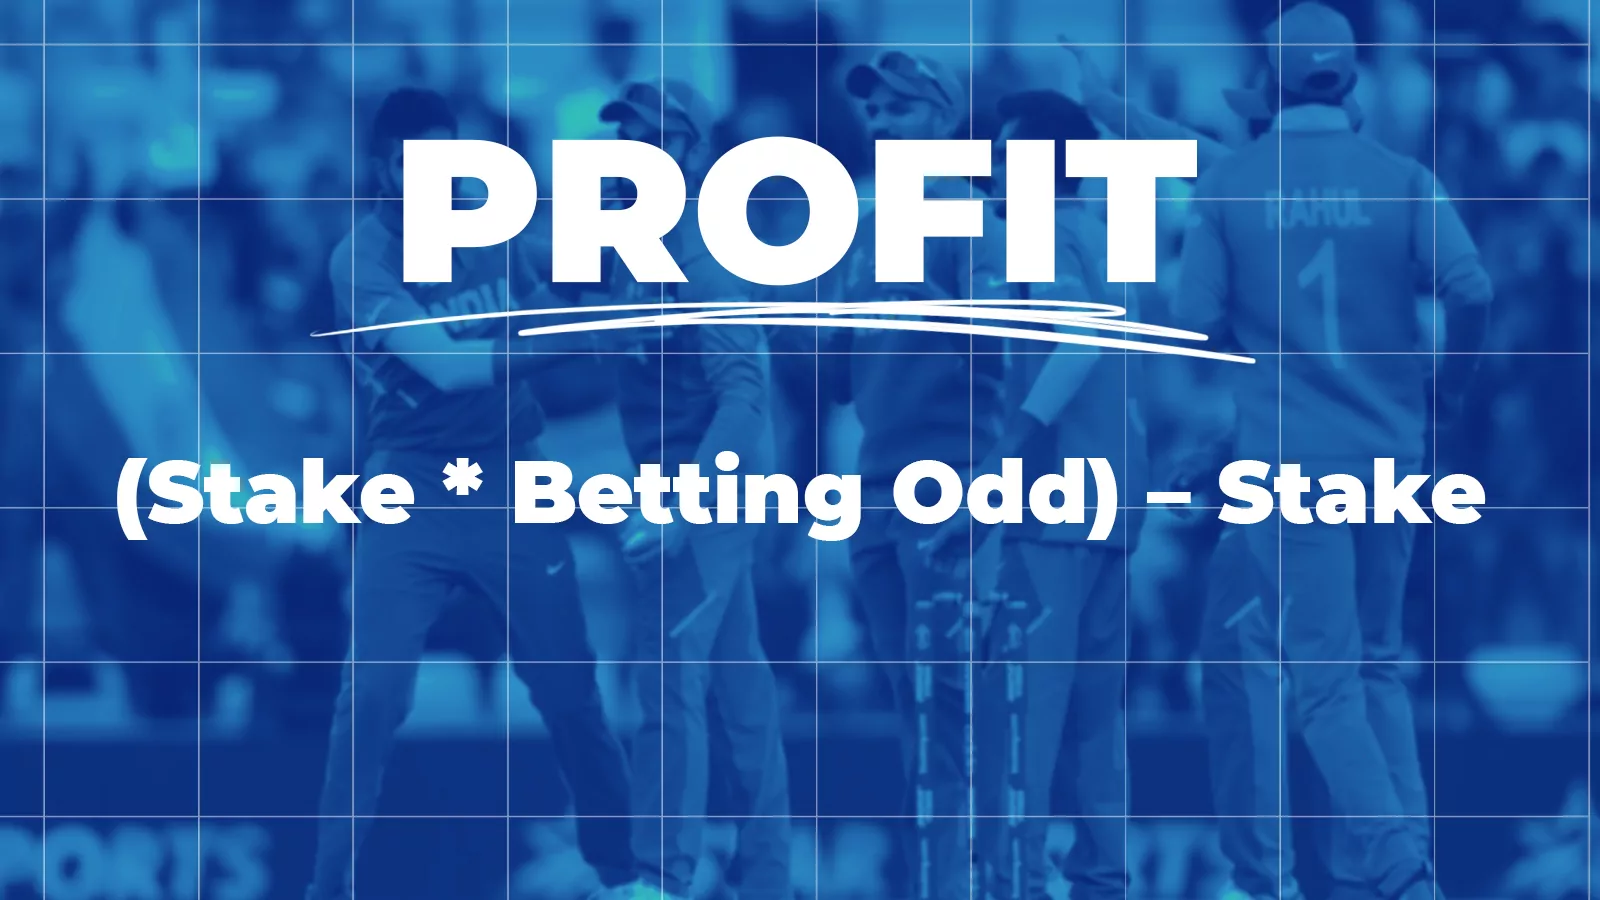 Learn more about cricket betting odds to place bets accurately.